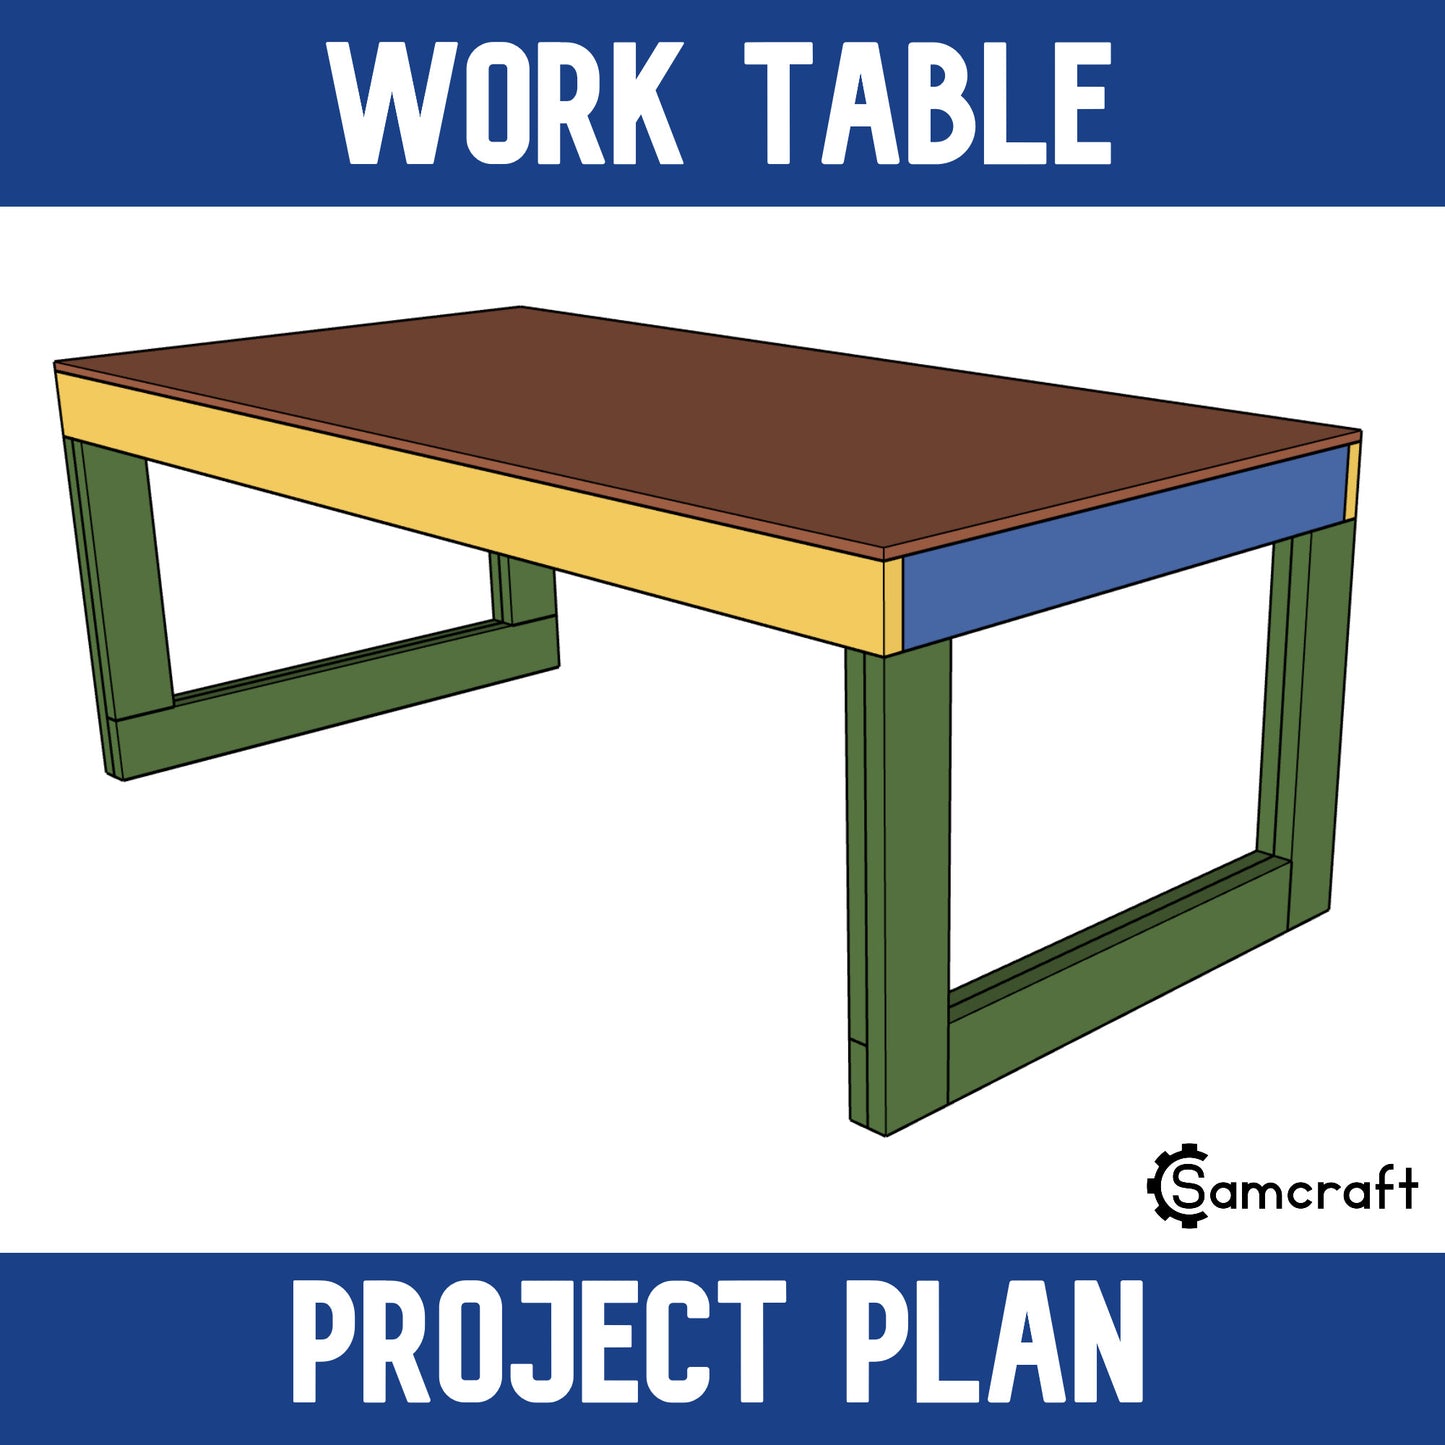 Work Table - 48"x96" - Project Plan